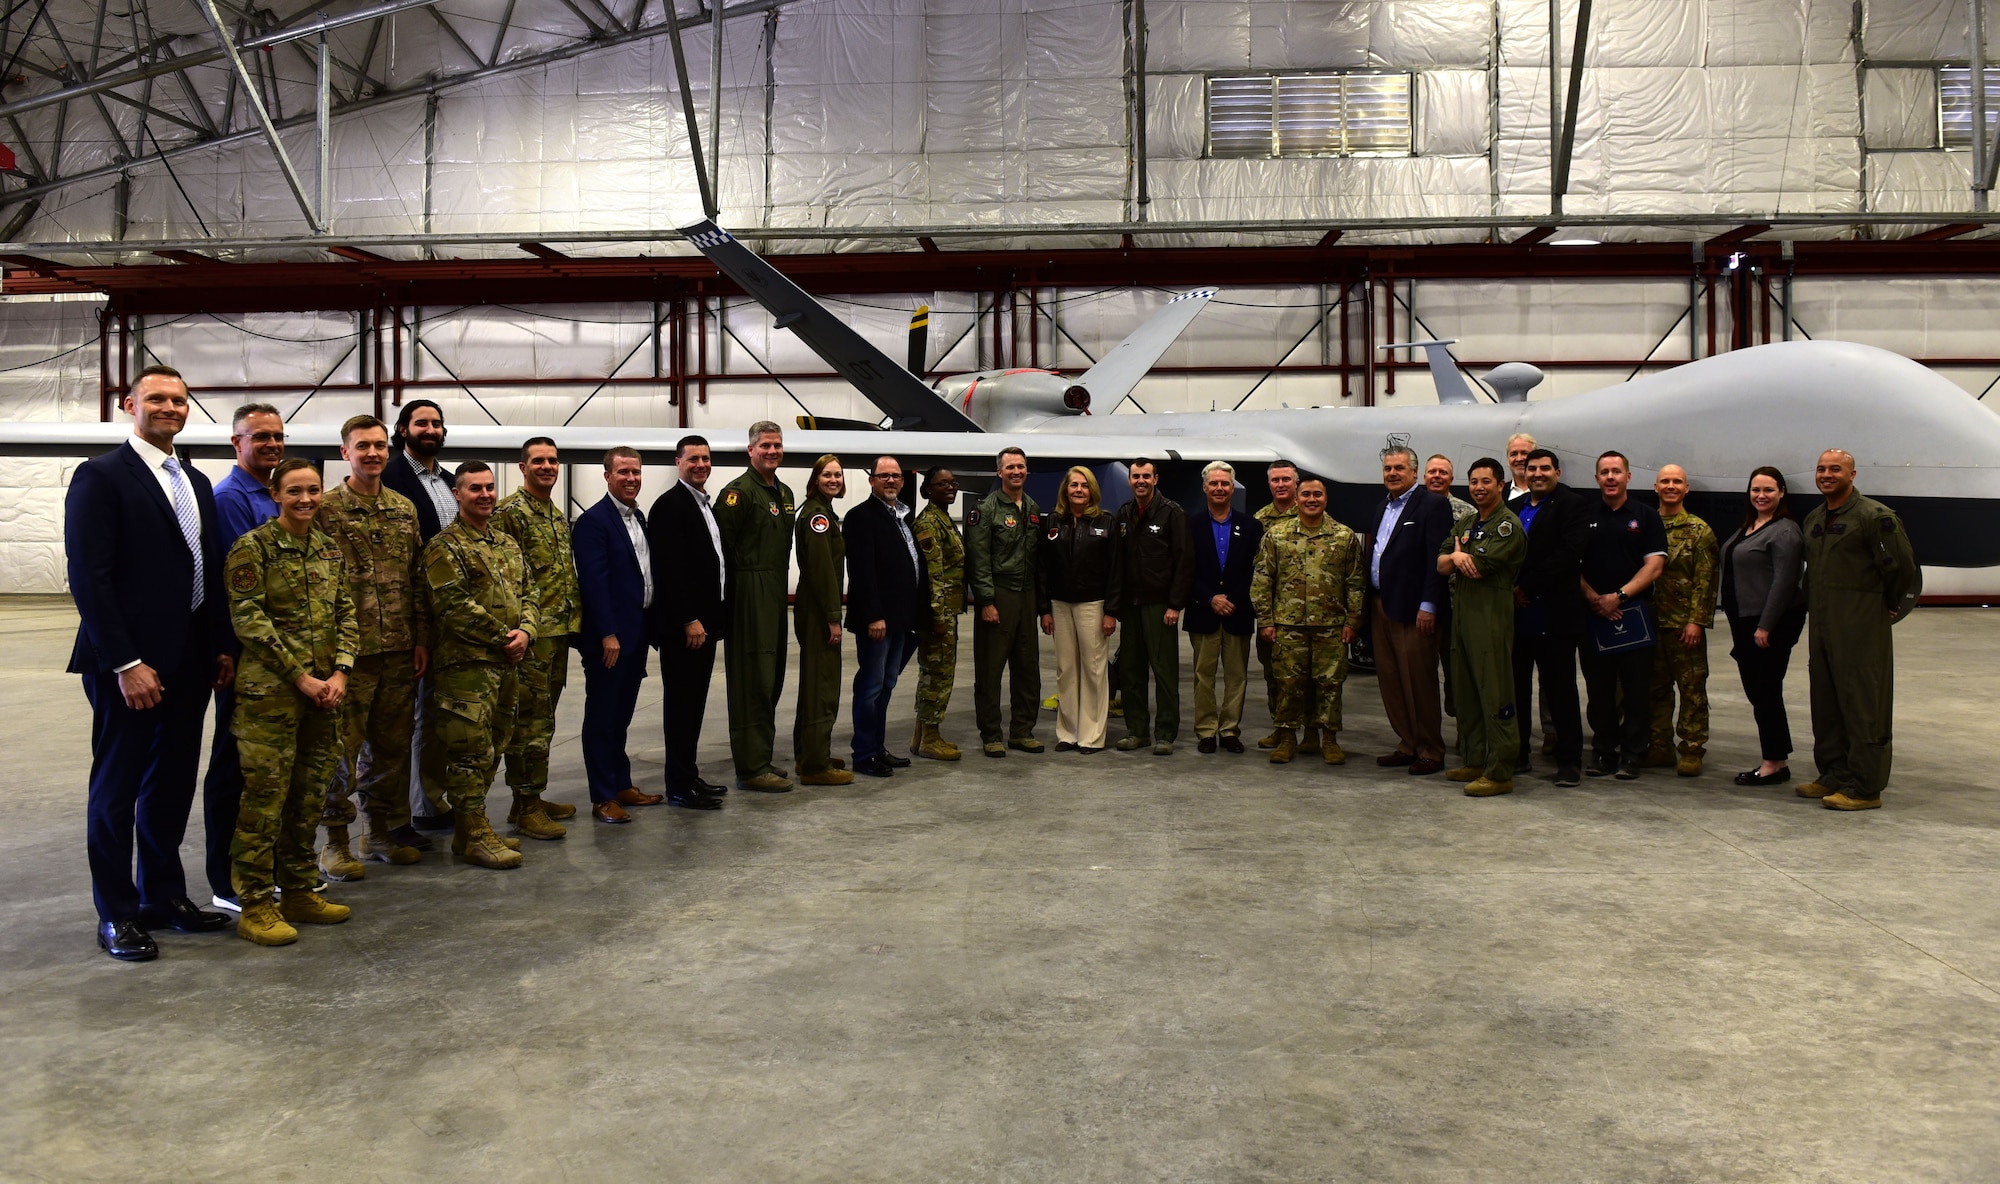 Members of Creech Air Force Base and the Las Vegas community stand in a line for a group photo near an MQ-9 Reaper